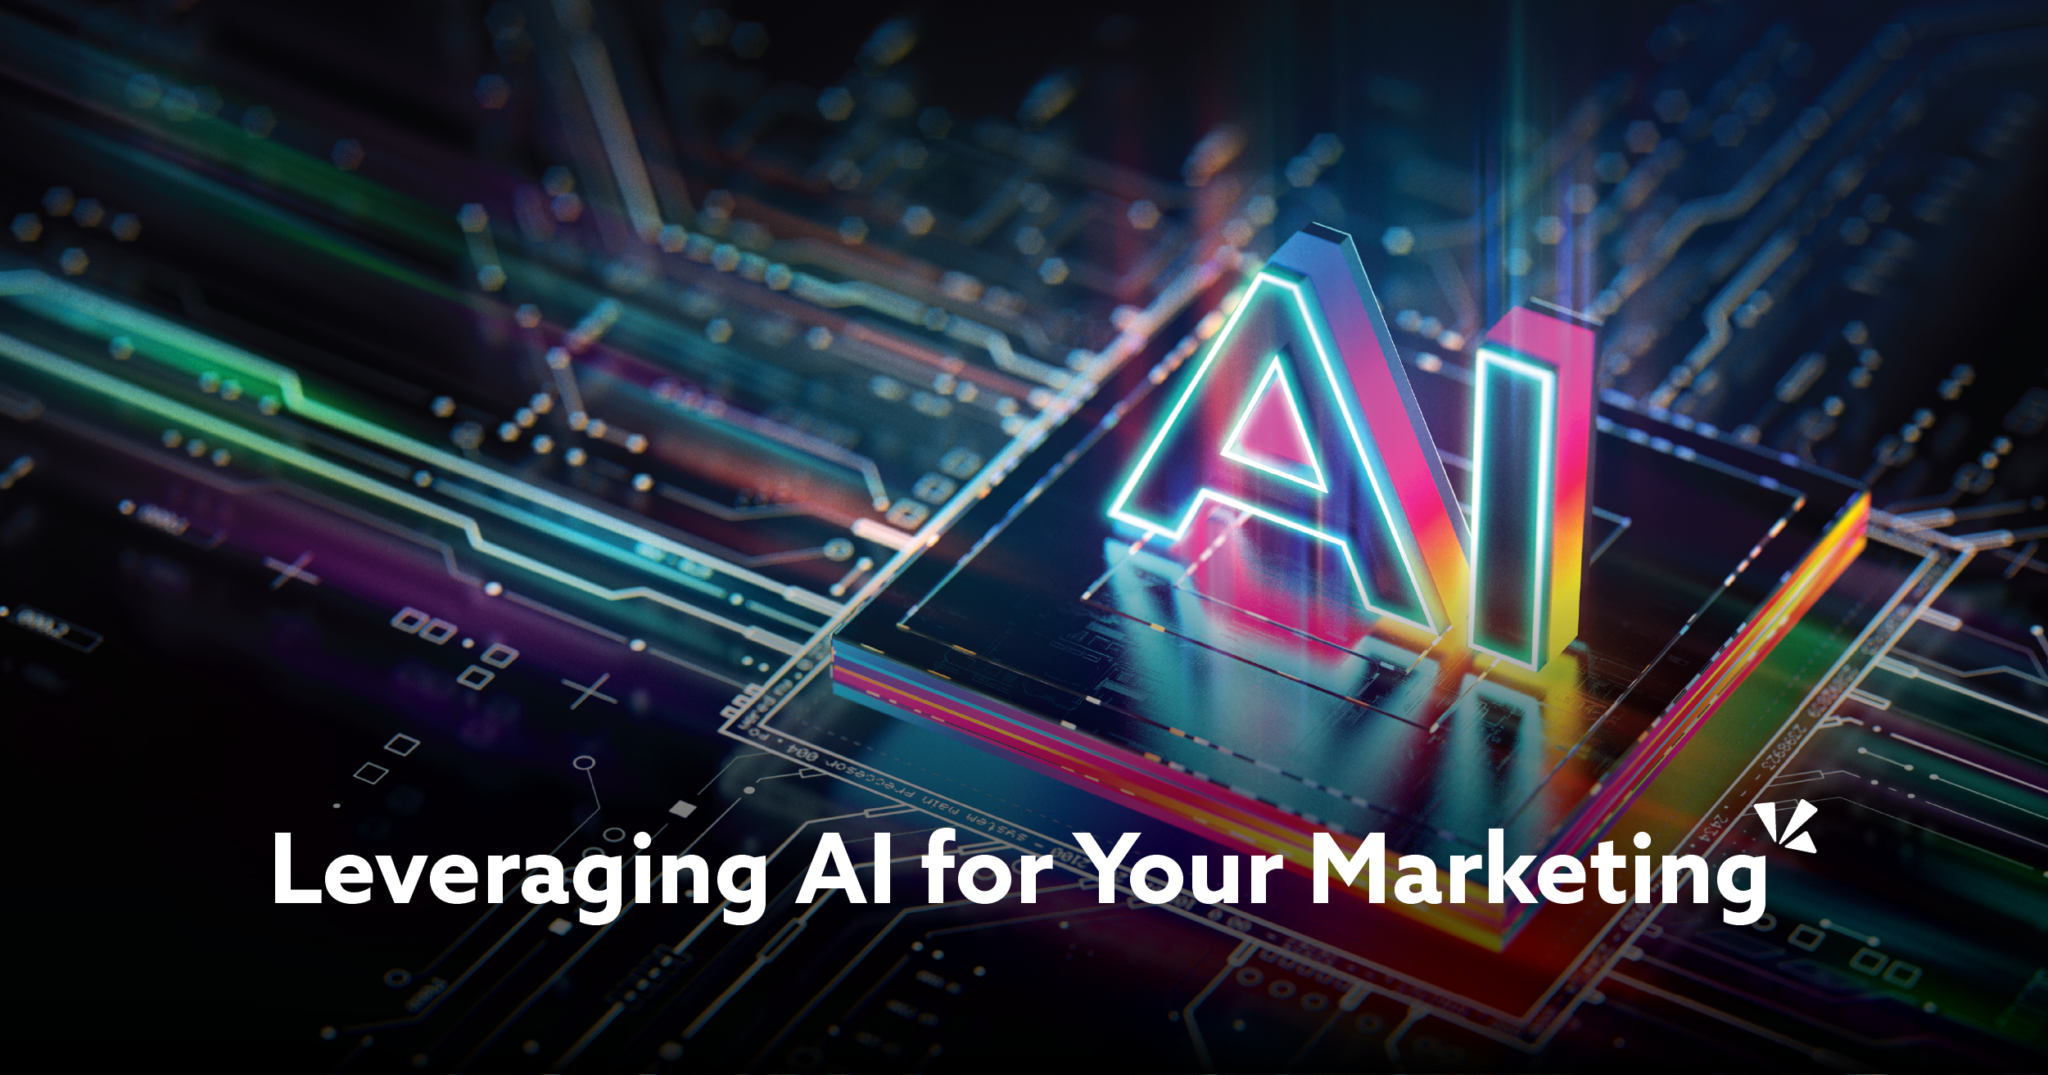 Circuit board with a large "AI" outlined in multiple colors with the phrase "Leveraging AI for Your Marketing" overlaid